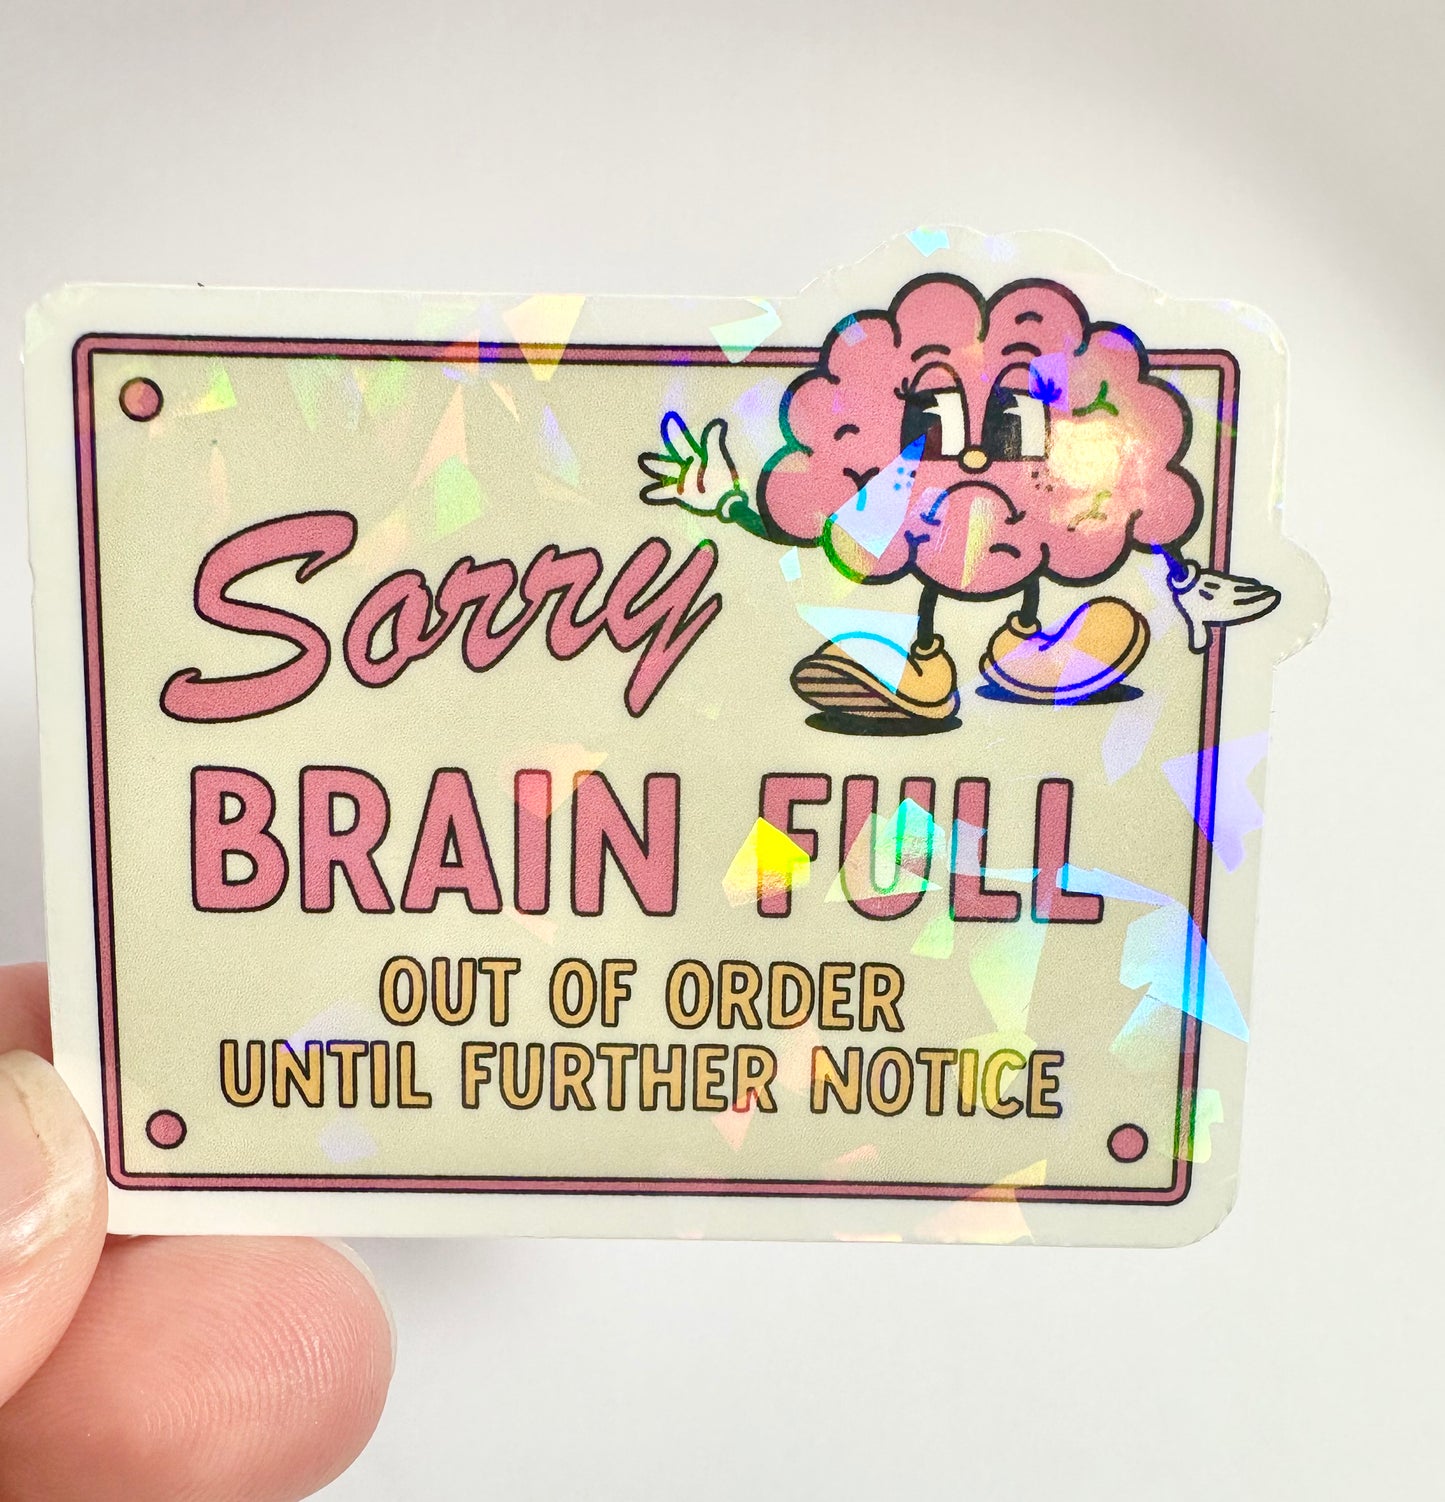 Sorry Brain Full, Out of Order Until Further Notice Sticker